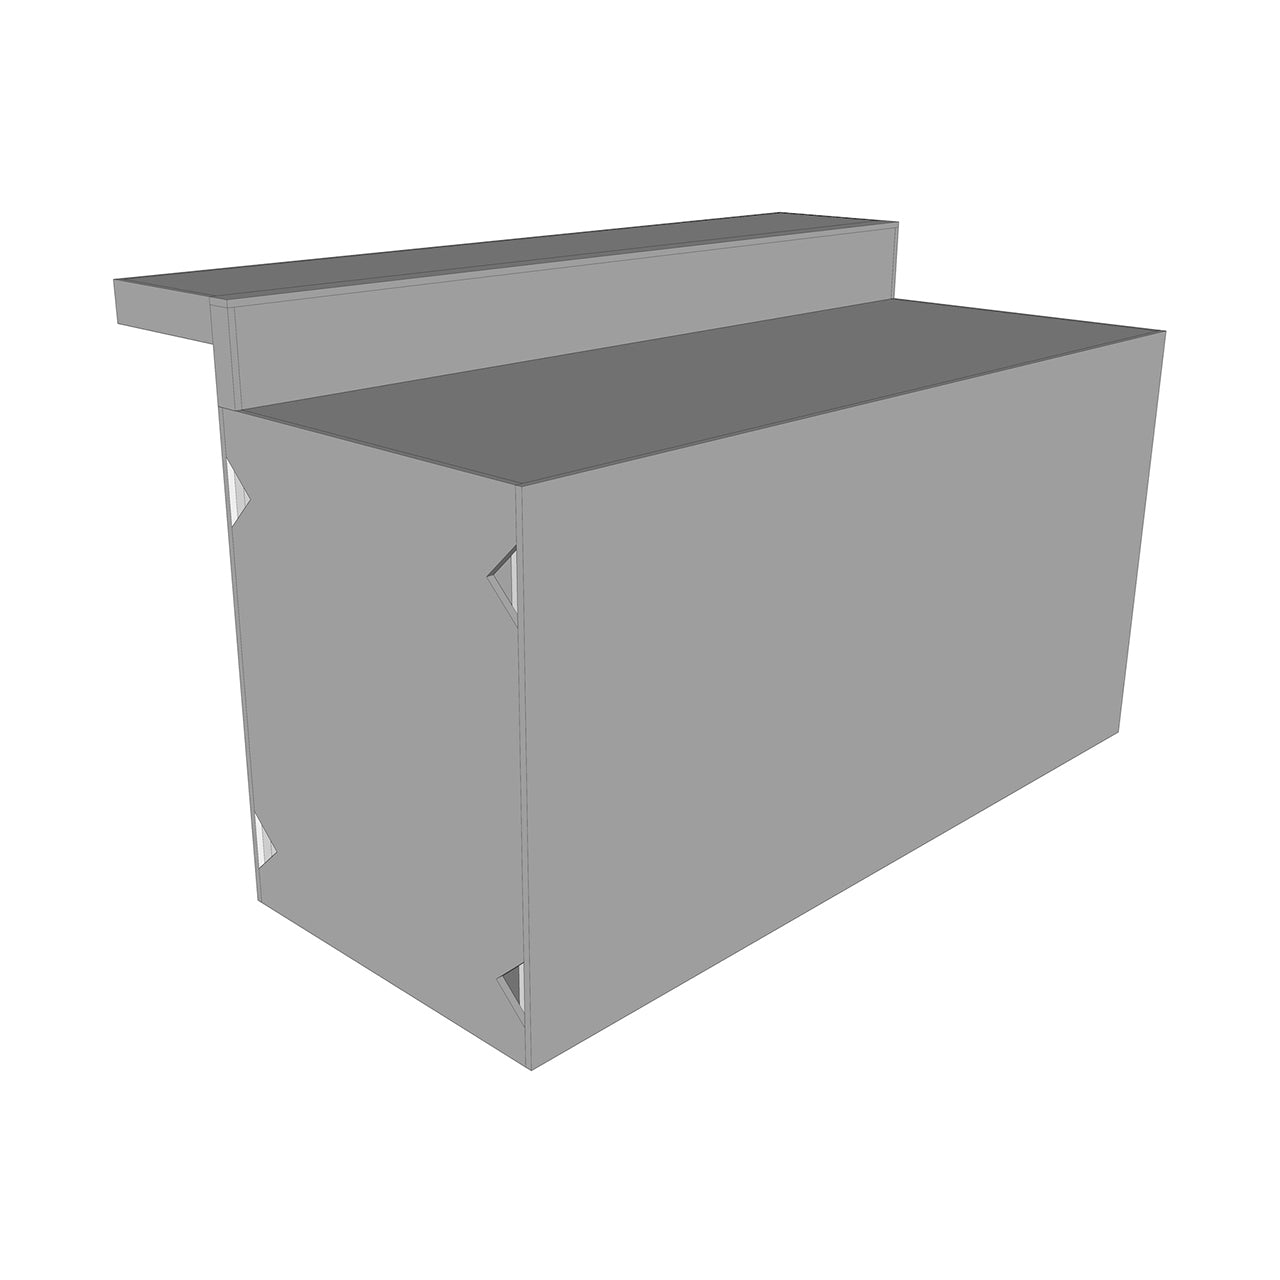 REFRIGERATION CABINET COMBO for Outdoor Kitchen | Width: 72" | Height: 36”(STD) or 31”(ADA) | Depth: 29” | Bar and Backsplash Options | Ready to Assemble and Finish